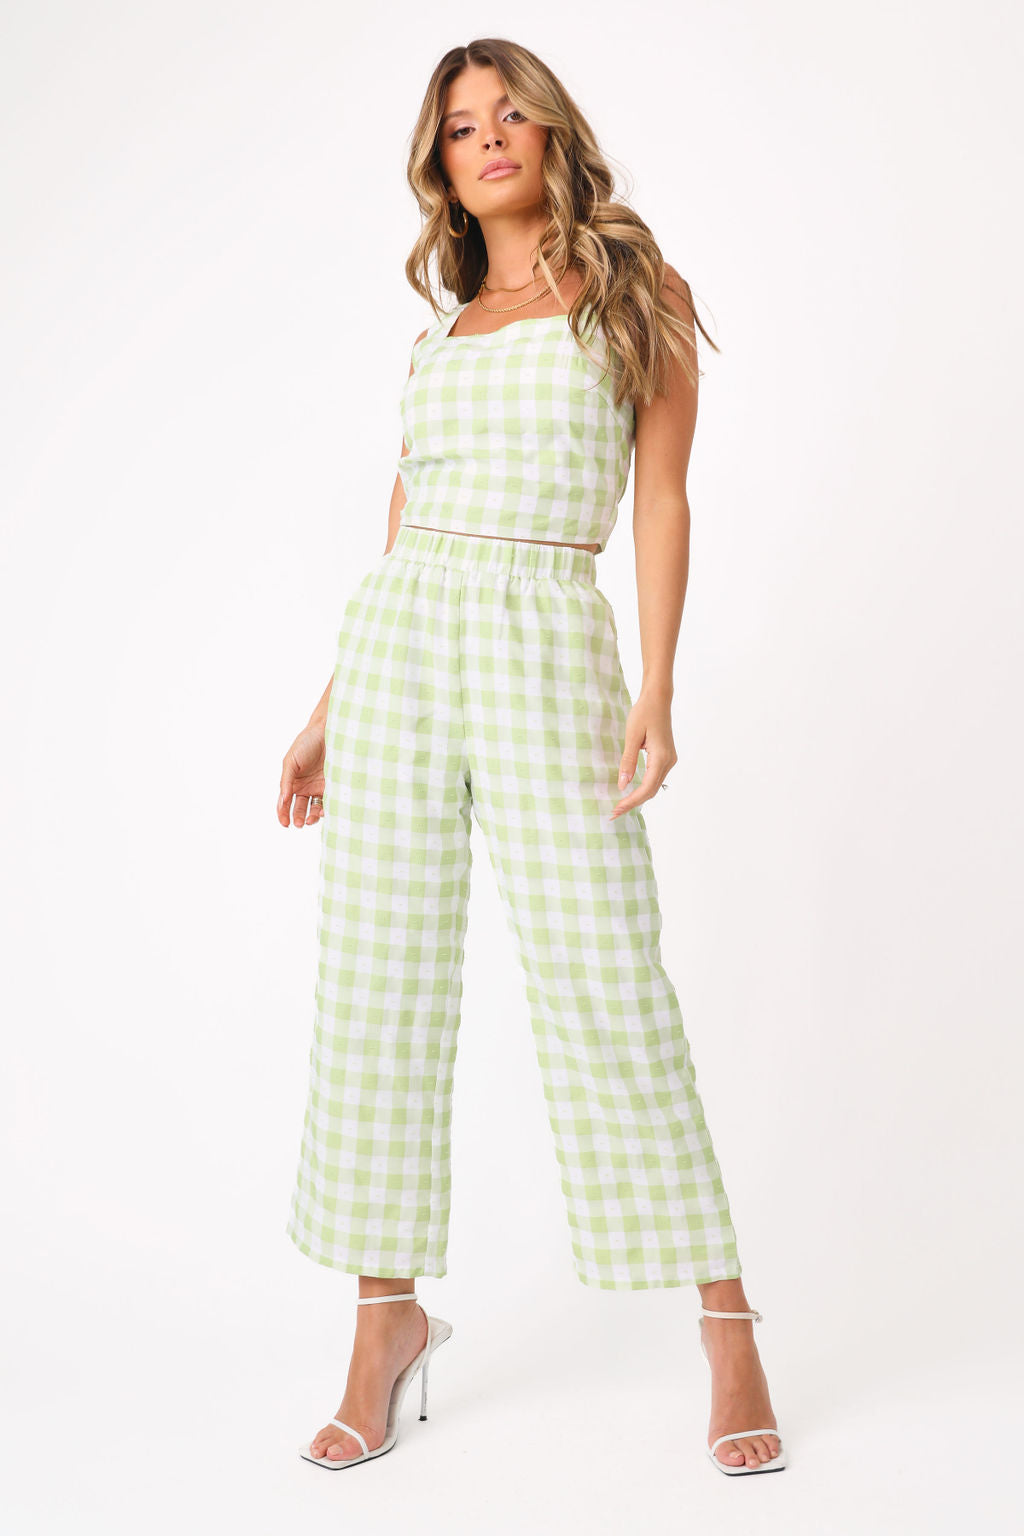 Front view of model wearing the Chloe Gingham Pant with matching top.